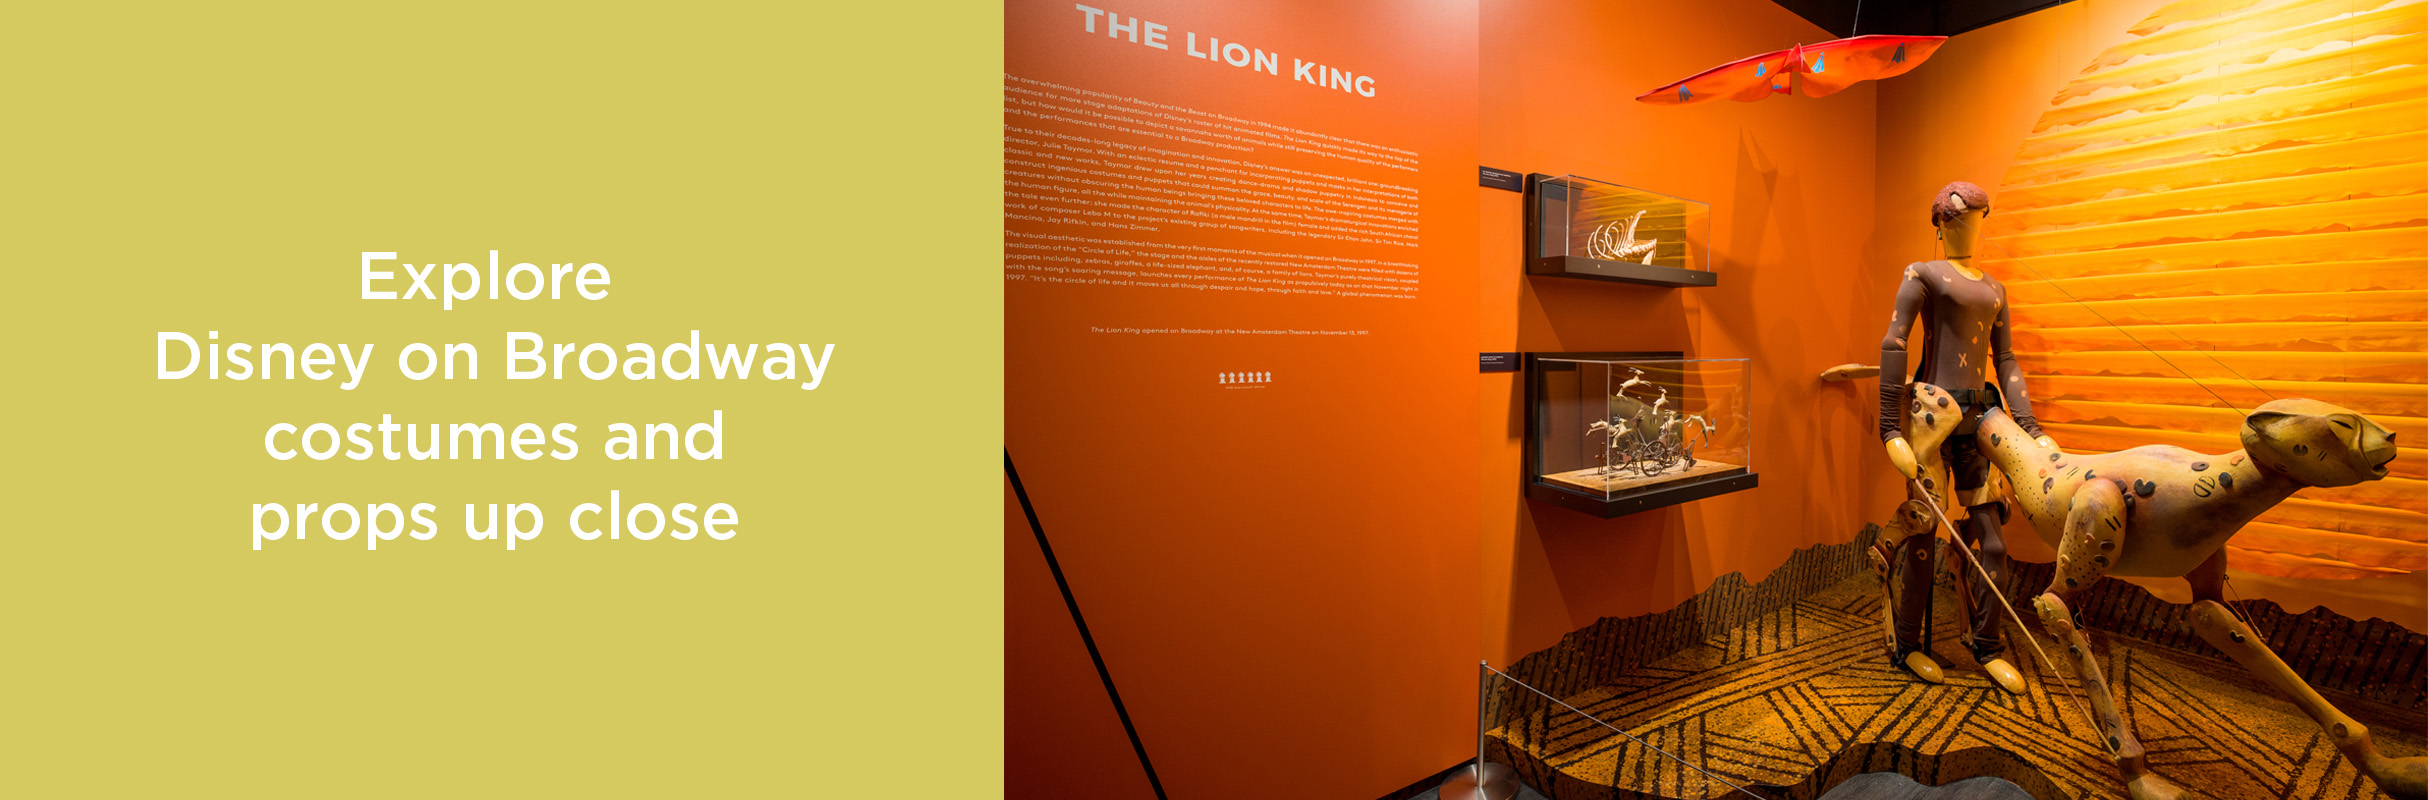 Explore Disney on Broadway Costumes and props up close with image of THE LION KING cheetah costume on display.